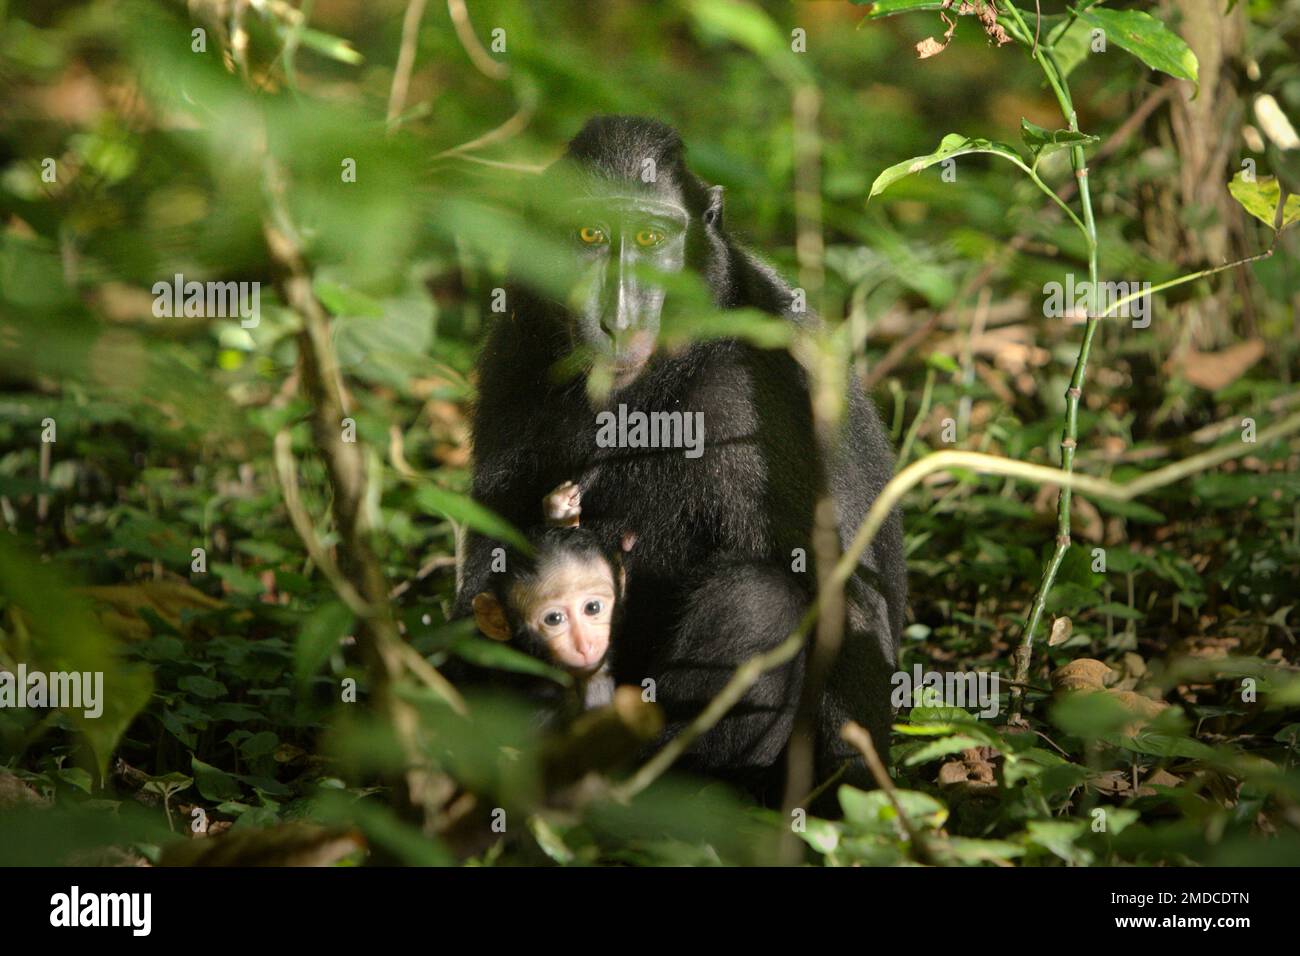 An adult female individual of Sulawesi black-crested macaque (Macaca nigra) is taking care an offspring during a weaning period in Tangkoko Nature Reserve, North Sulawesi, Indonesia. The interactions between ecological and social factors have a significant effect on the survival of crested macaque offsprings, according to a research paper by scientists at Macaca Nigra Project. One of the main social factors is the number of females in the group. 'Crested macaque groups with more adult females are better able to defend resources against other groups,' they wrote. Stock Photo